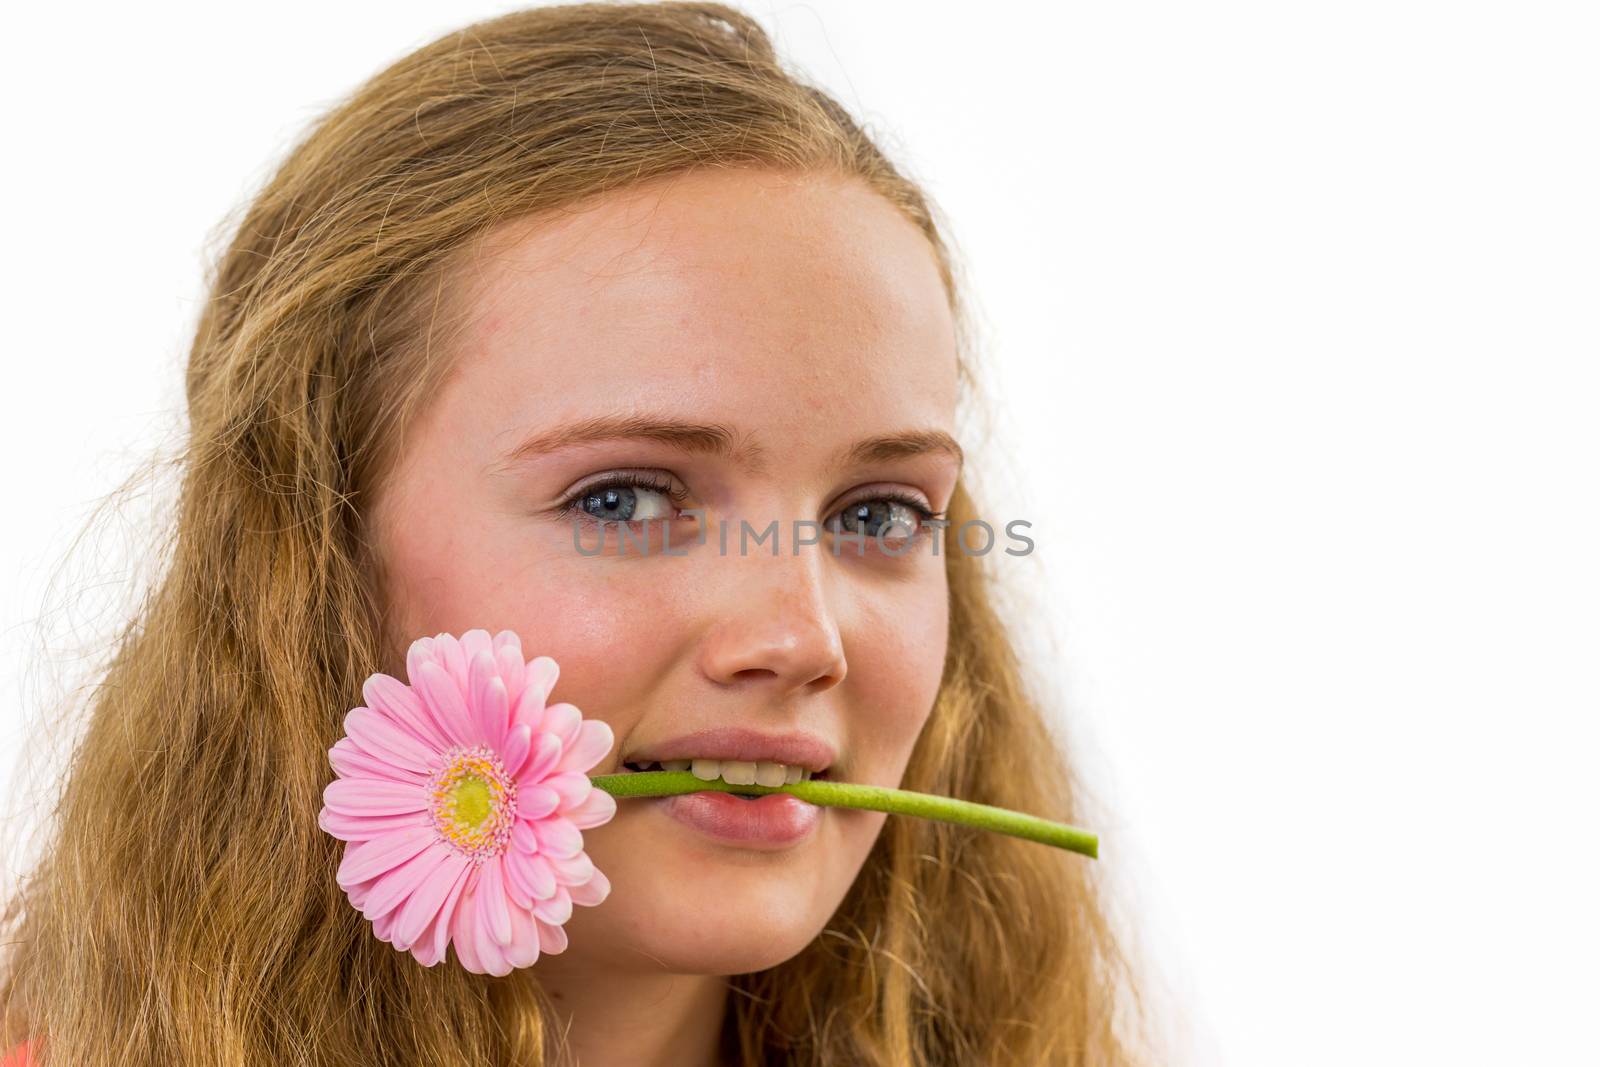 Face of european teenage girl with flower in her mouth isolated on white background